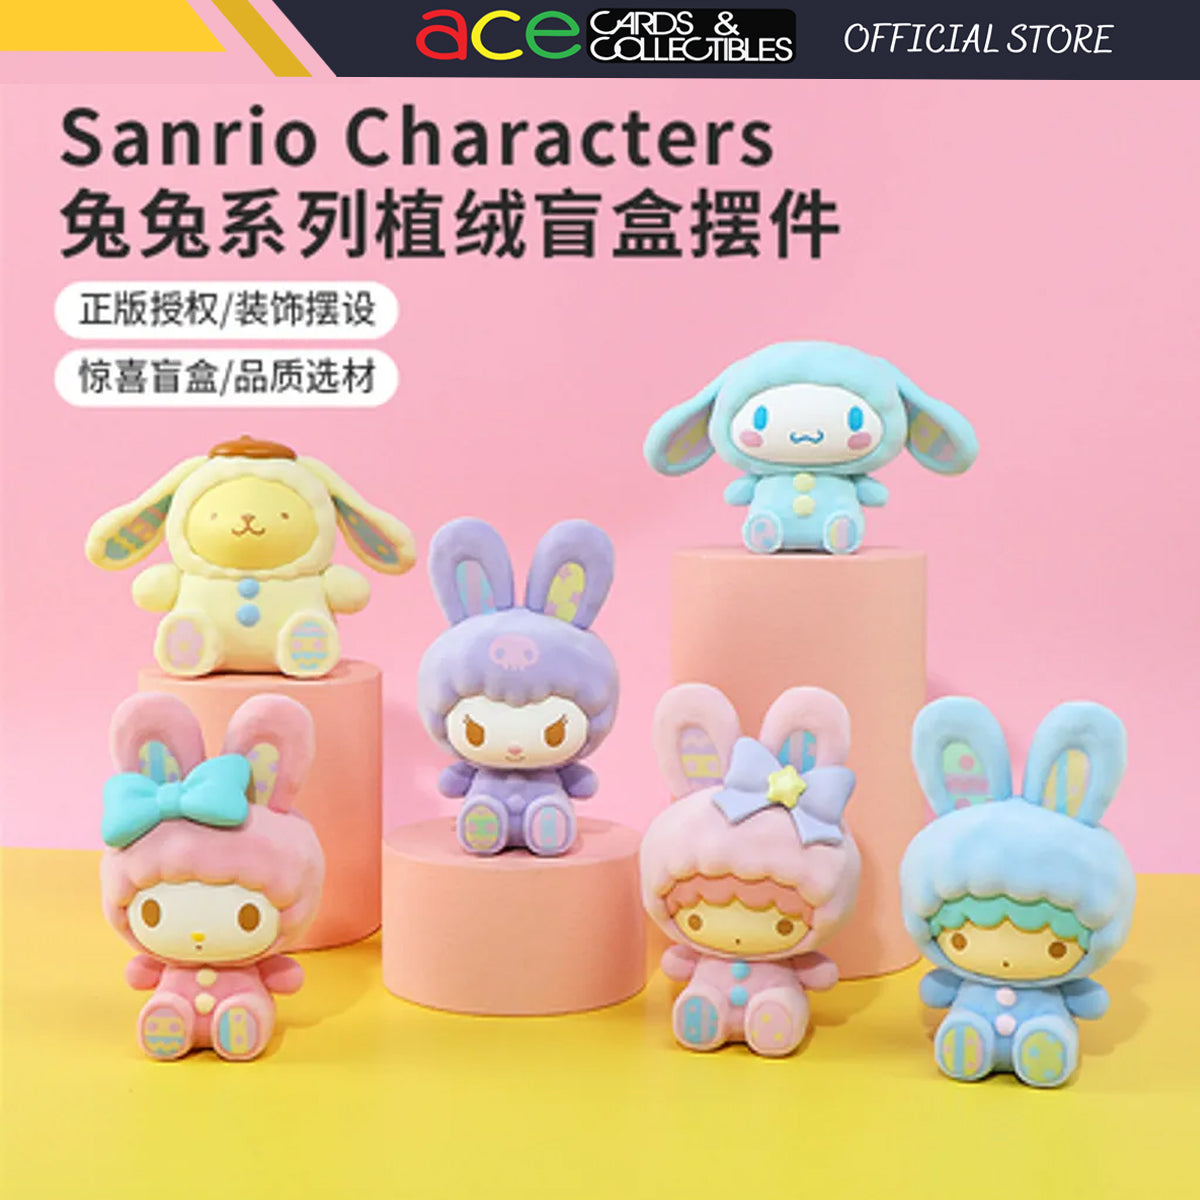 Miniso x Sanrio Characters Rabbit Series-Whole Display Box (6pcs)-Miniso-Ace Cards & Collectibles